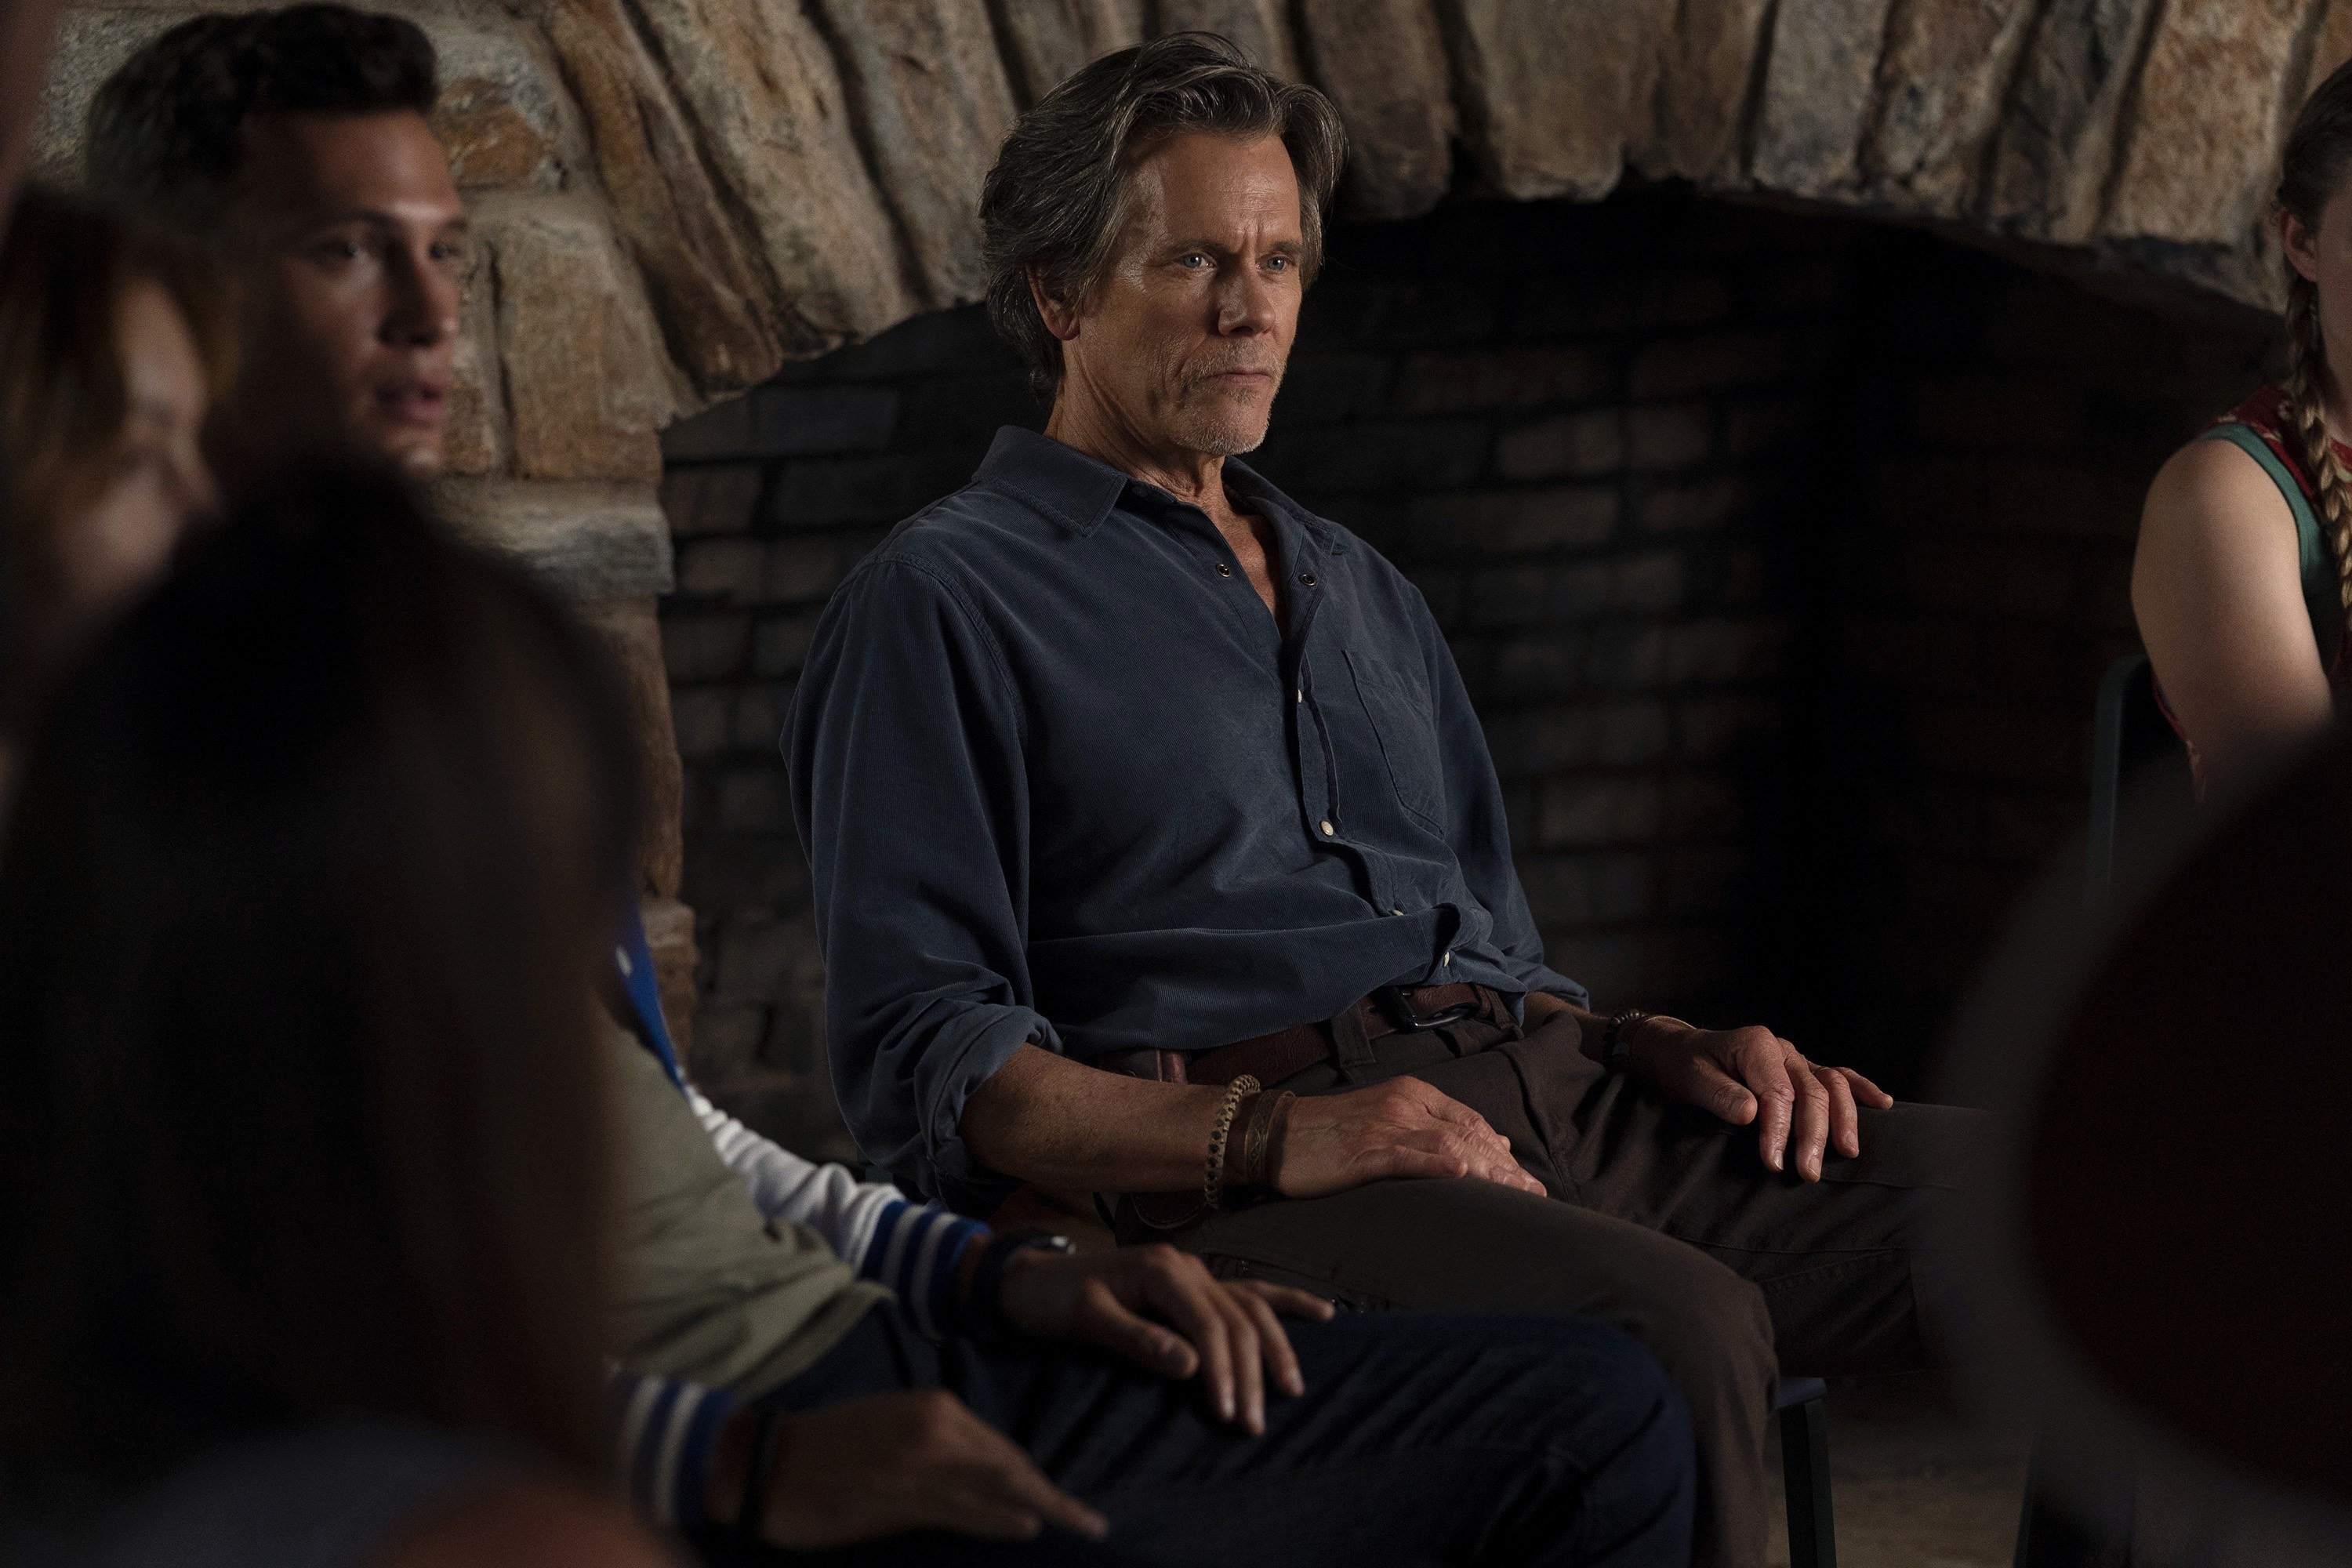 Kevin Bacon sitting with a group.